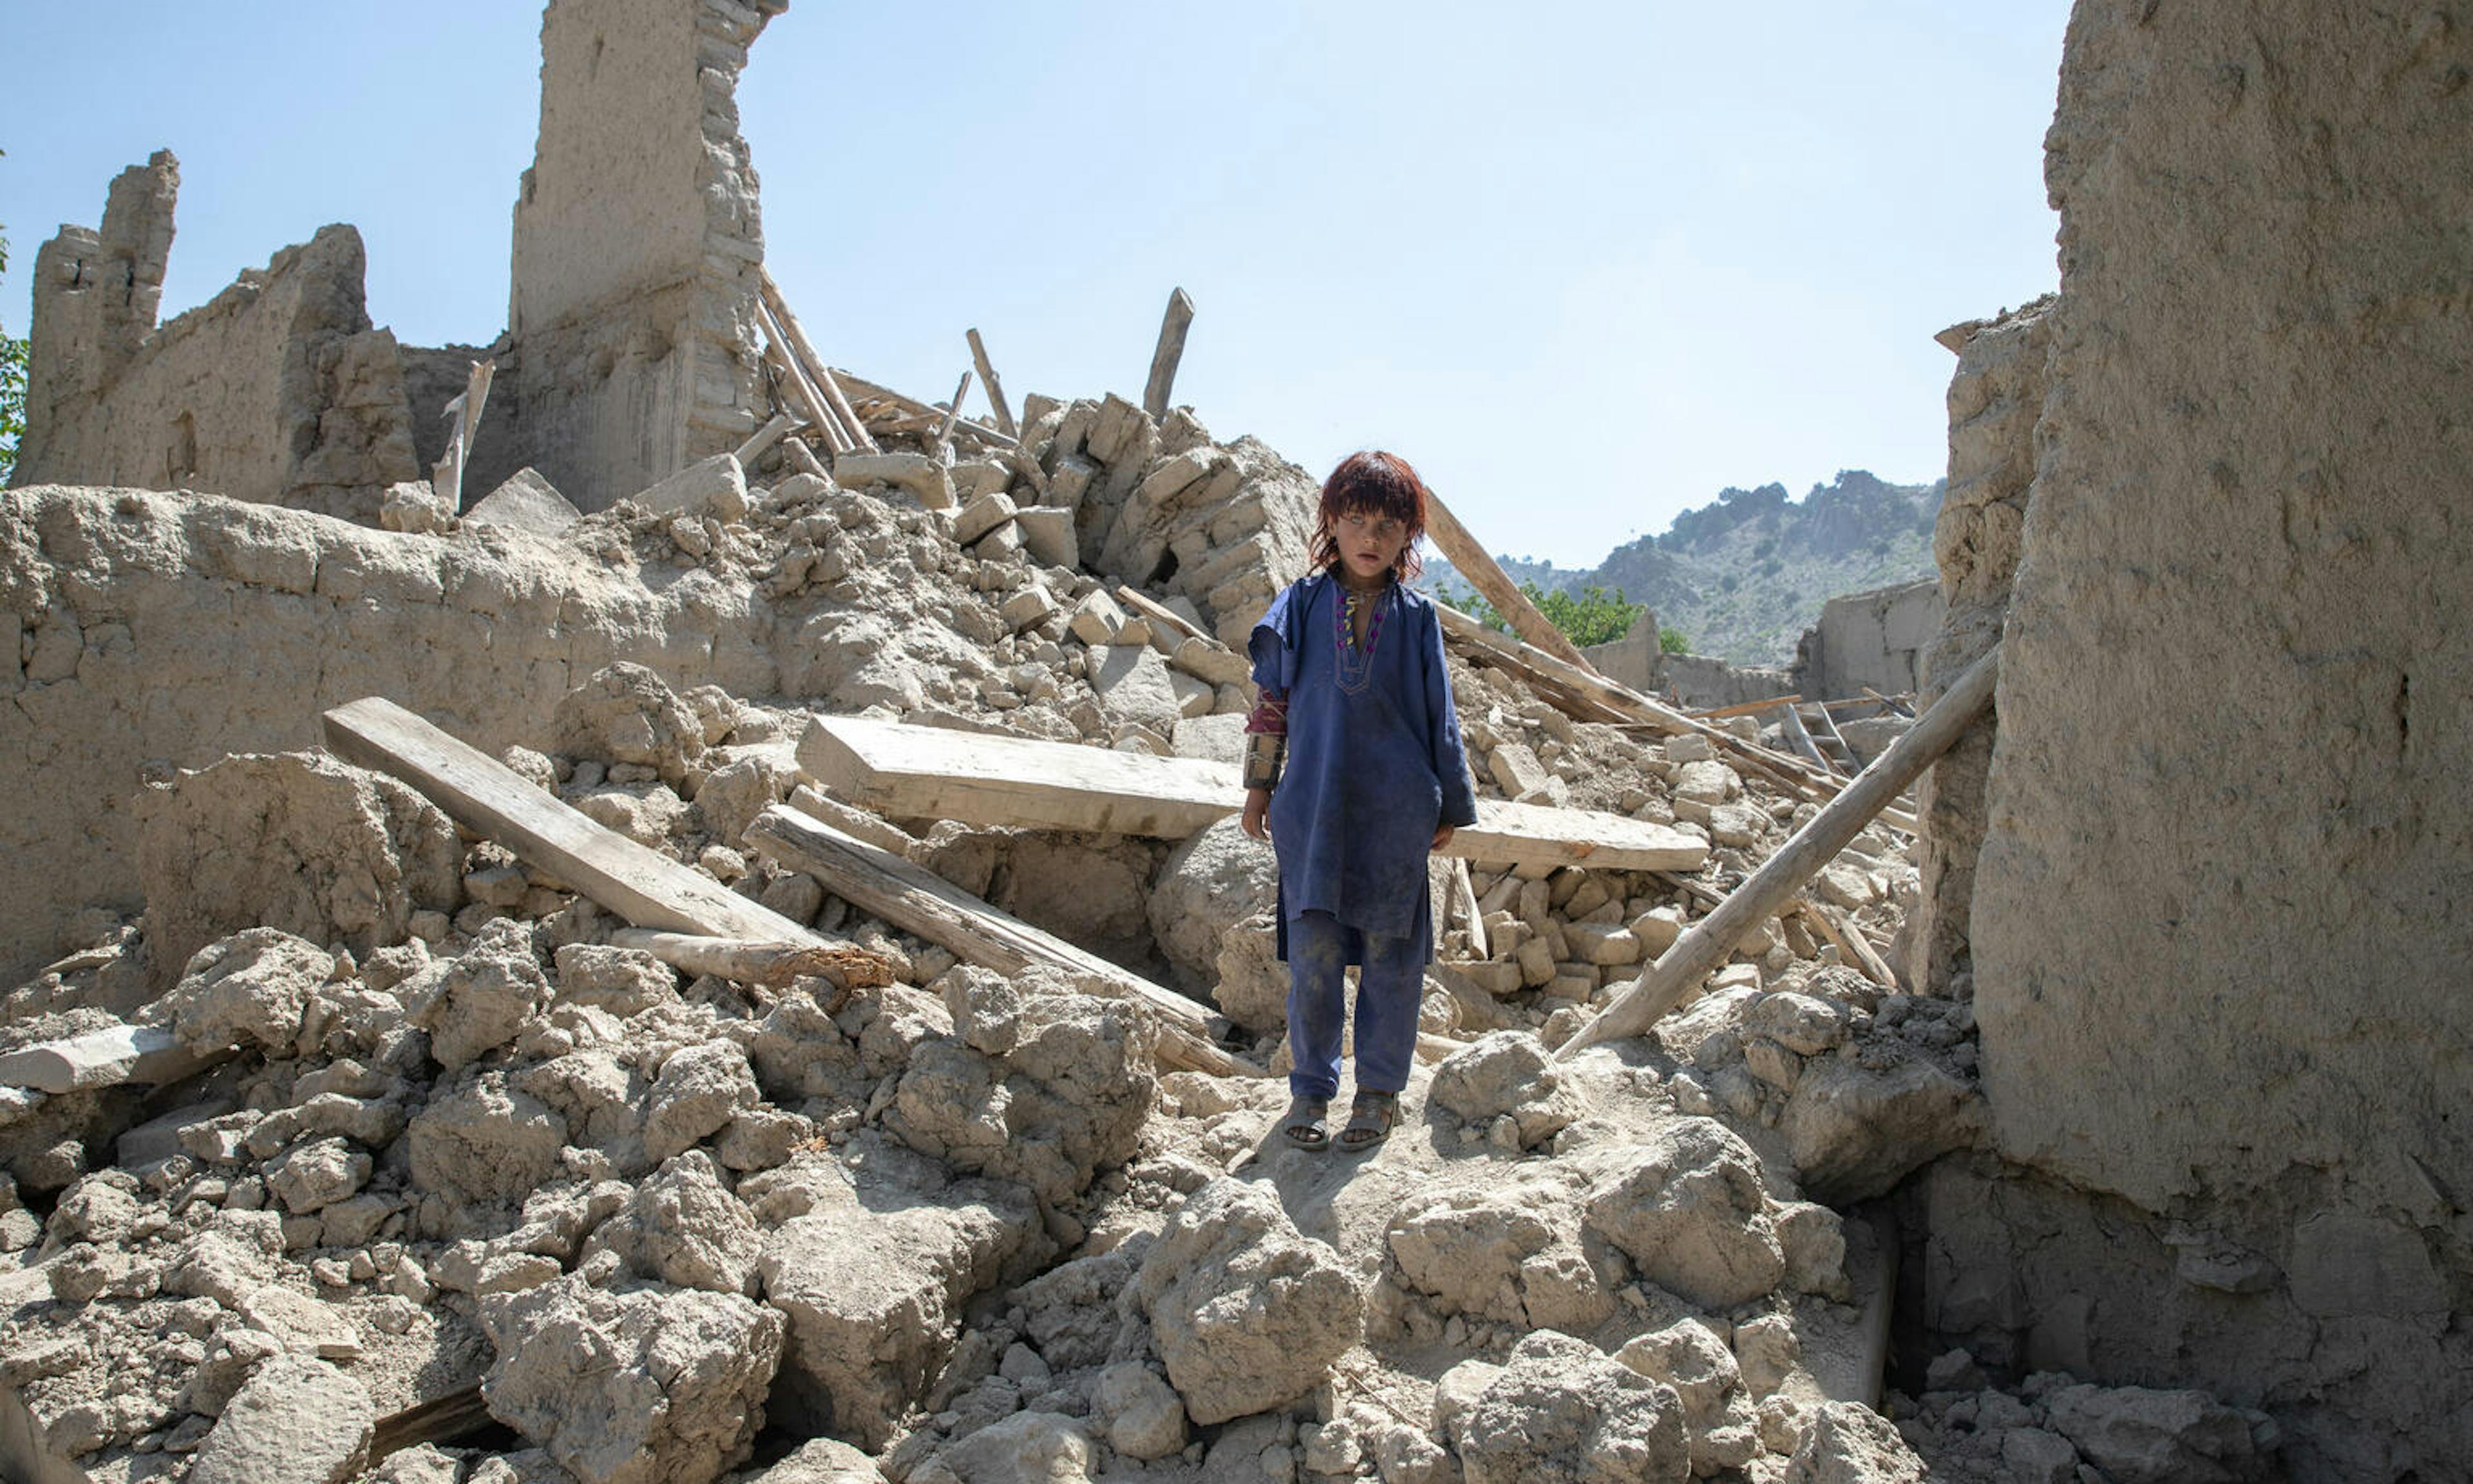 Zaid Allah, 6, stands in the rubble of his home where most of his family died as a result of the devastating earthquake on 22 June.